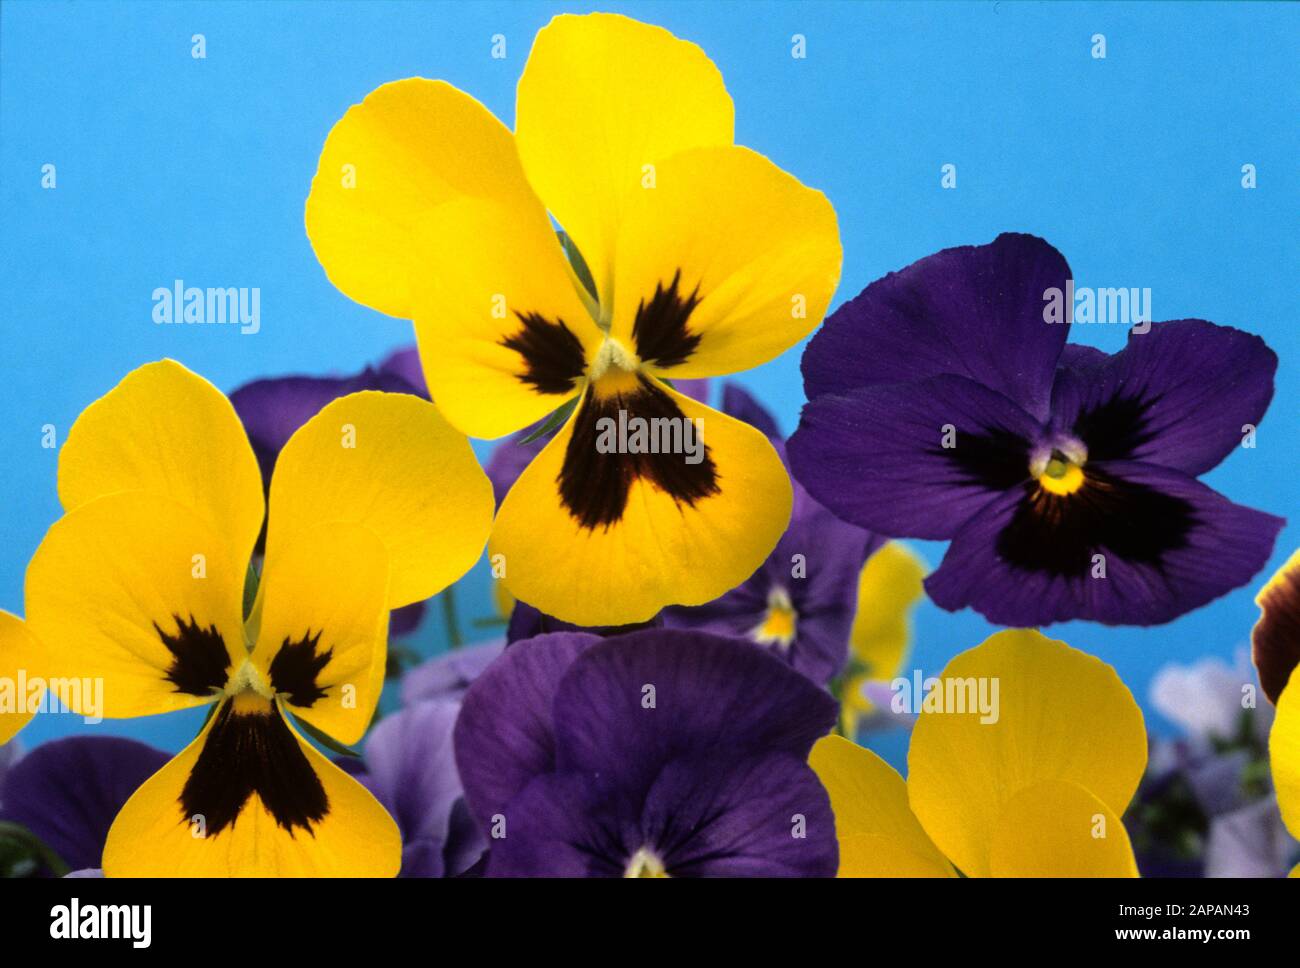 yellow and lilac pansy violets on blue background Stock Photo